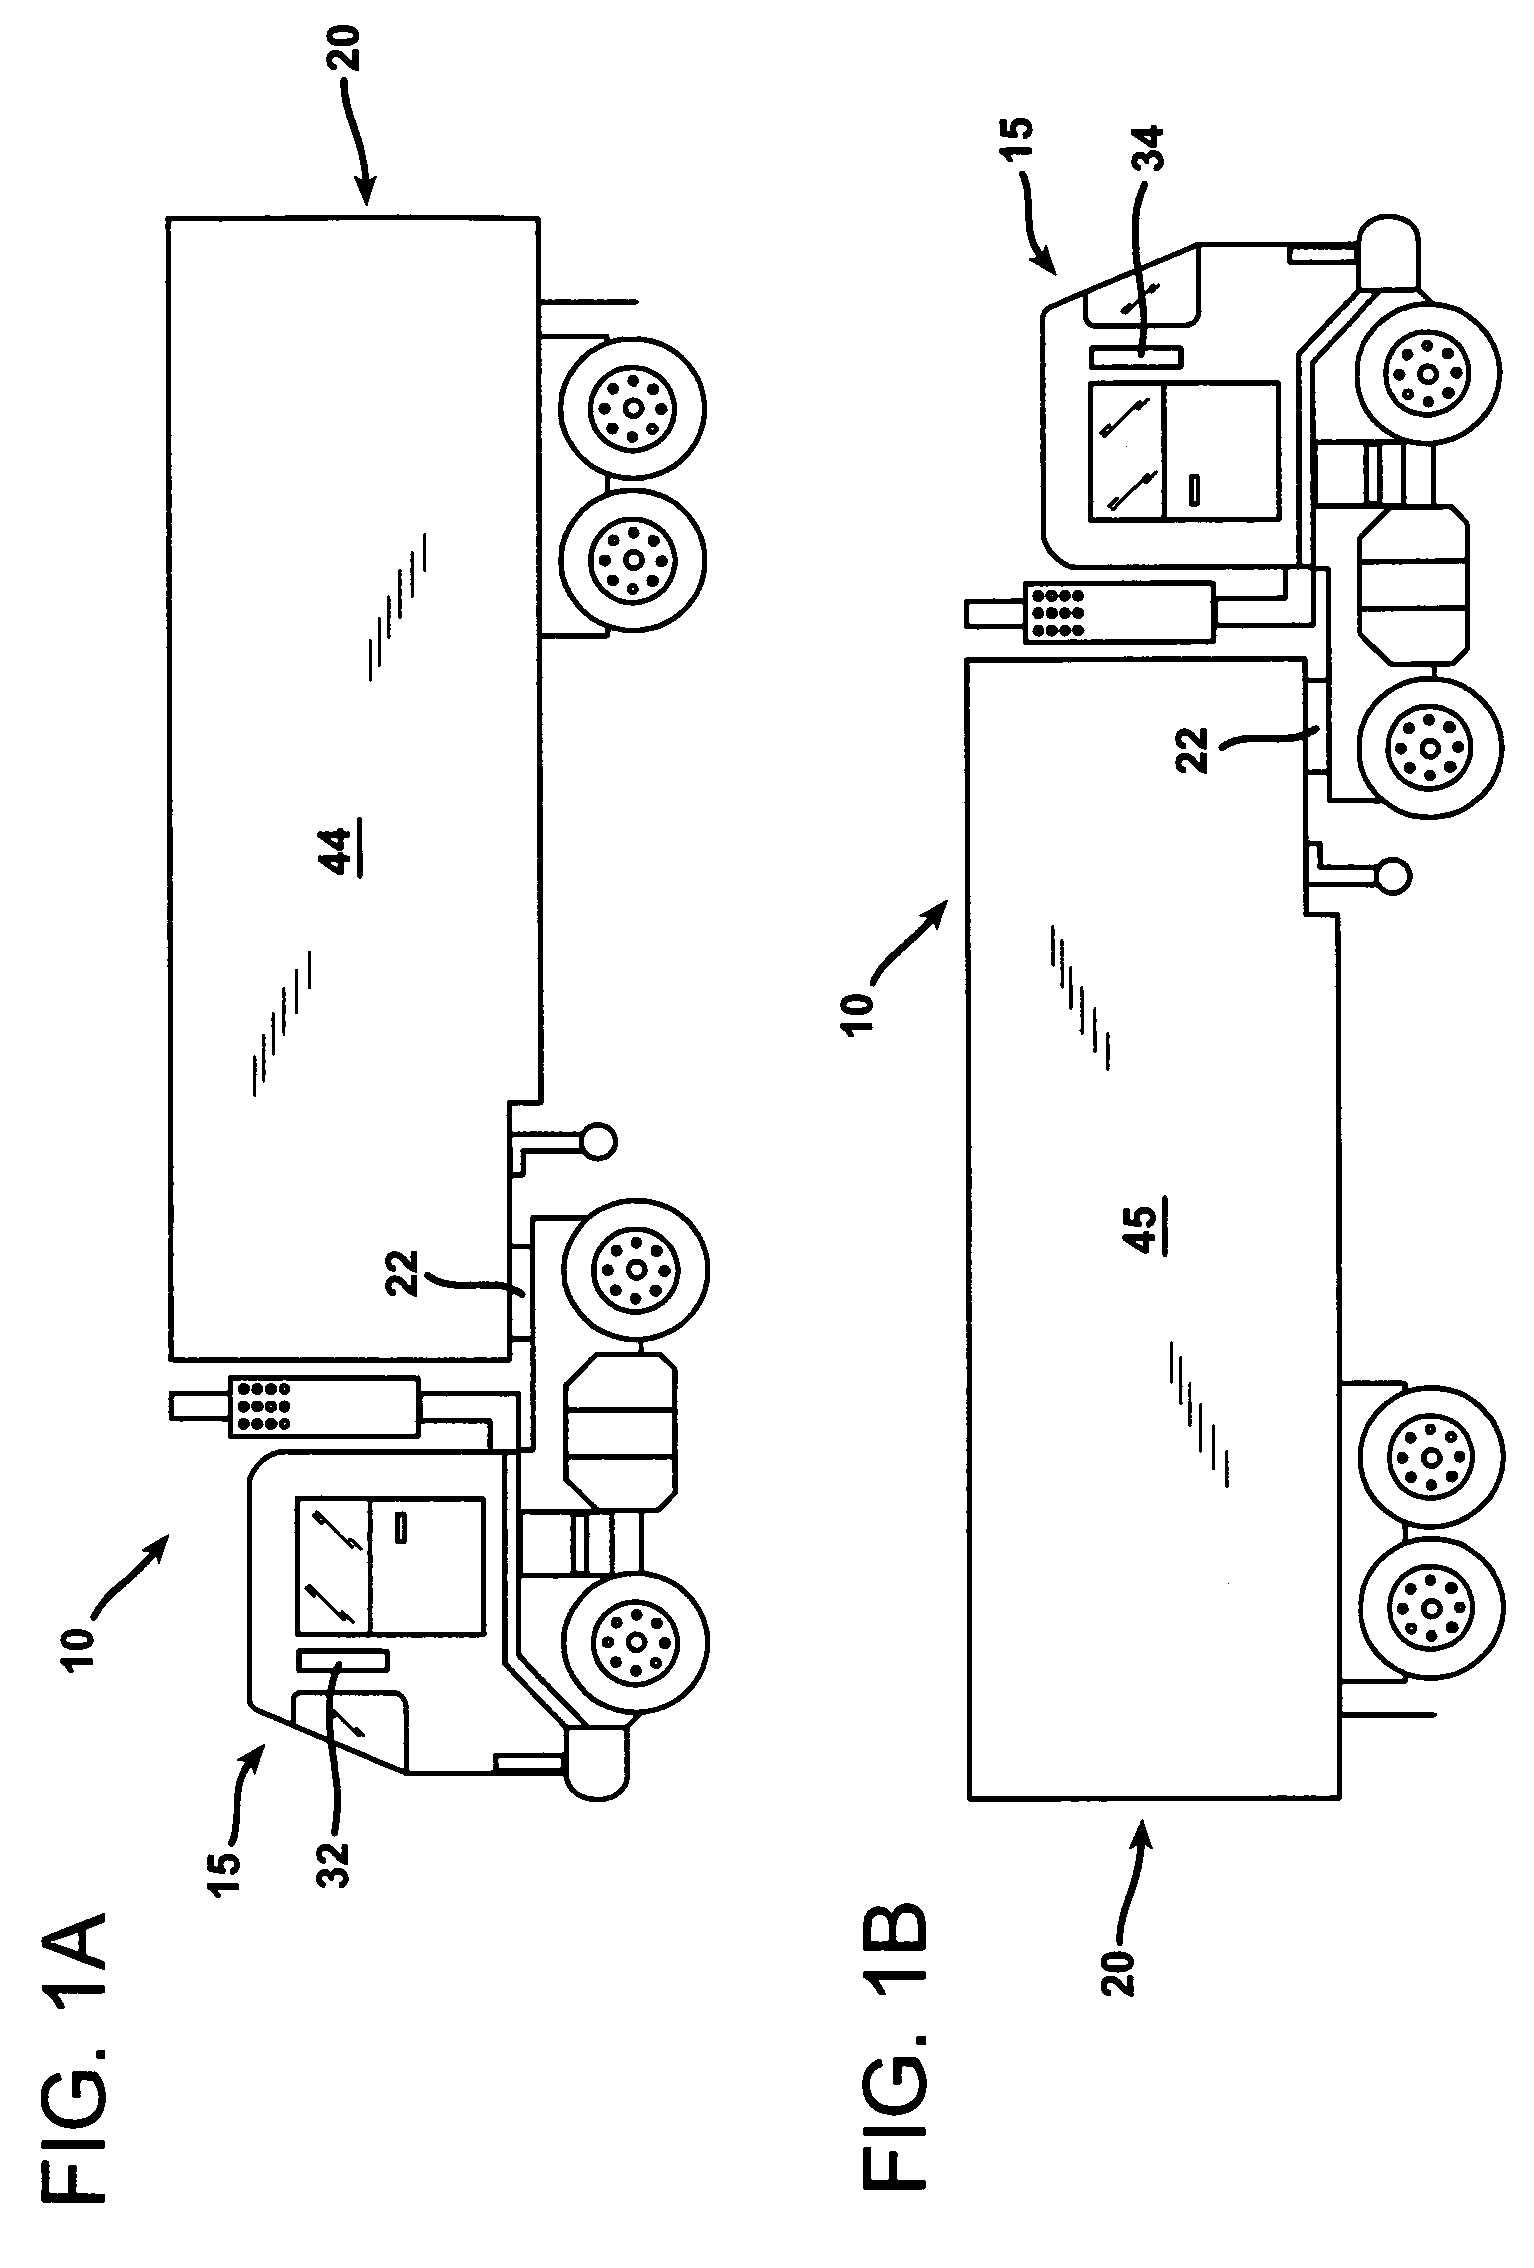 Vehicle safety system having methods and apparatus configurable for various vehicle geometries